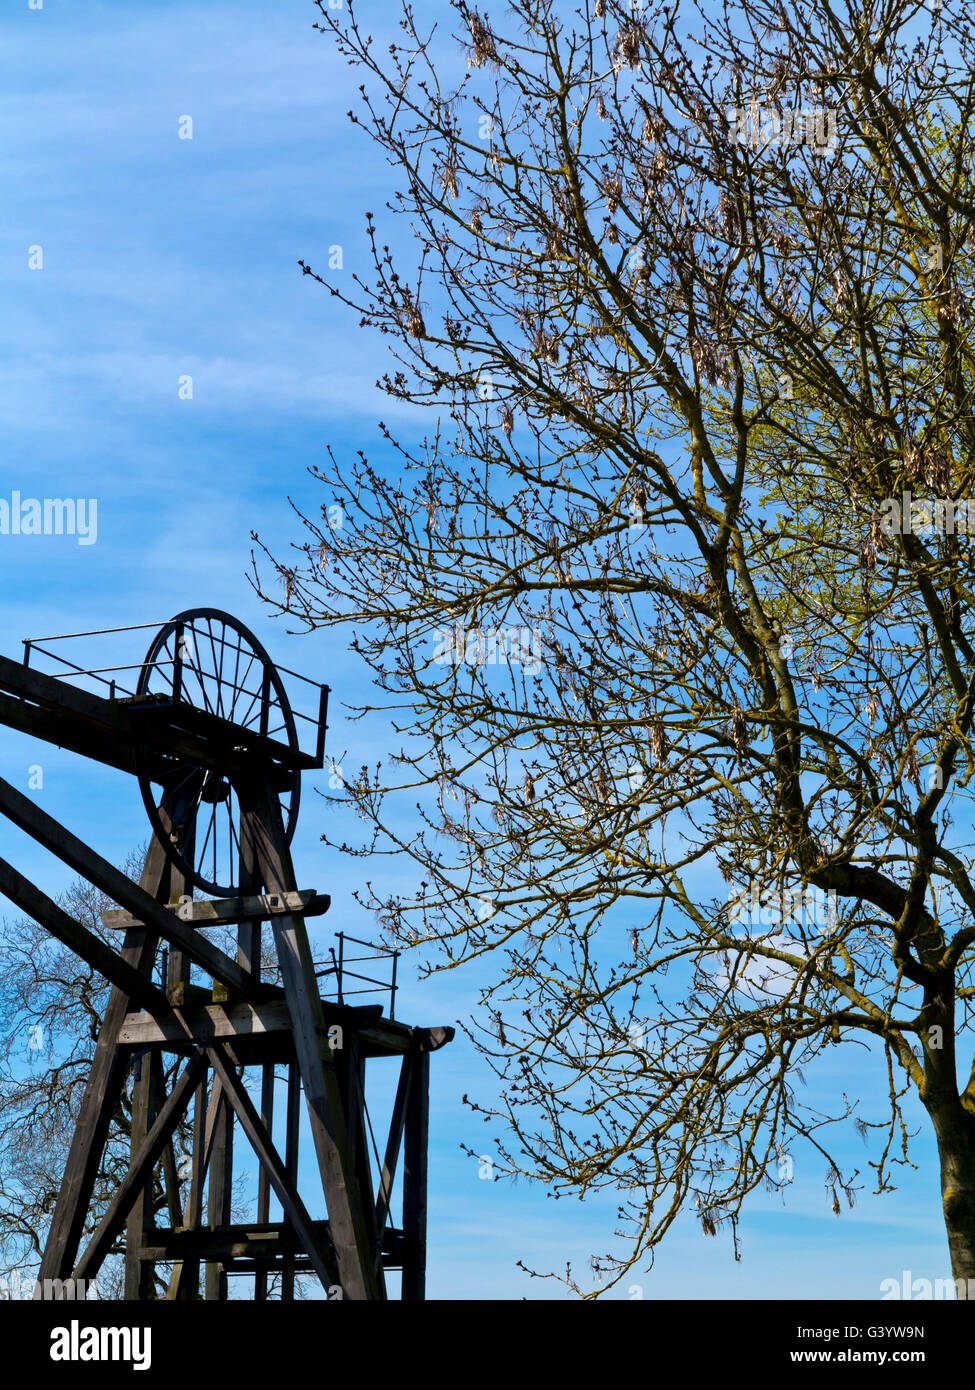 Brinsley Headstocks the remains of a former coal mine near Eastwood in Nottinghamshire England UK which closed in 1934 Stock Photo